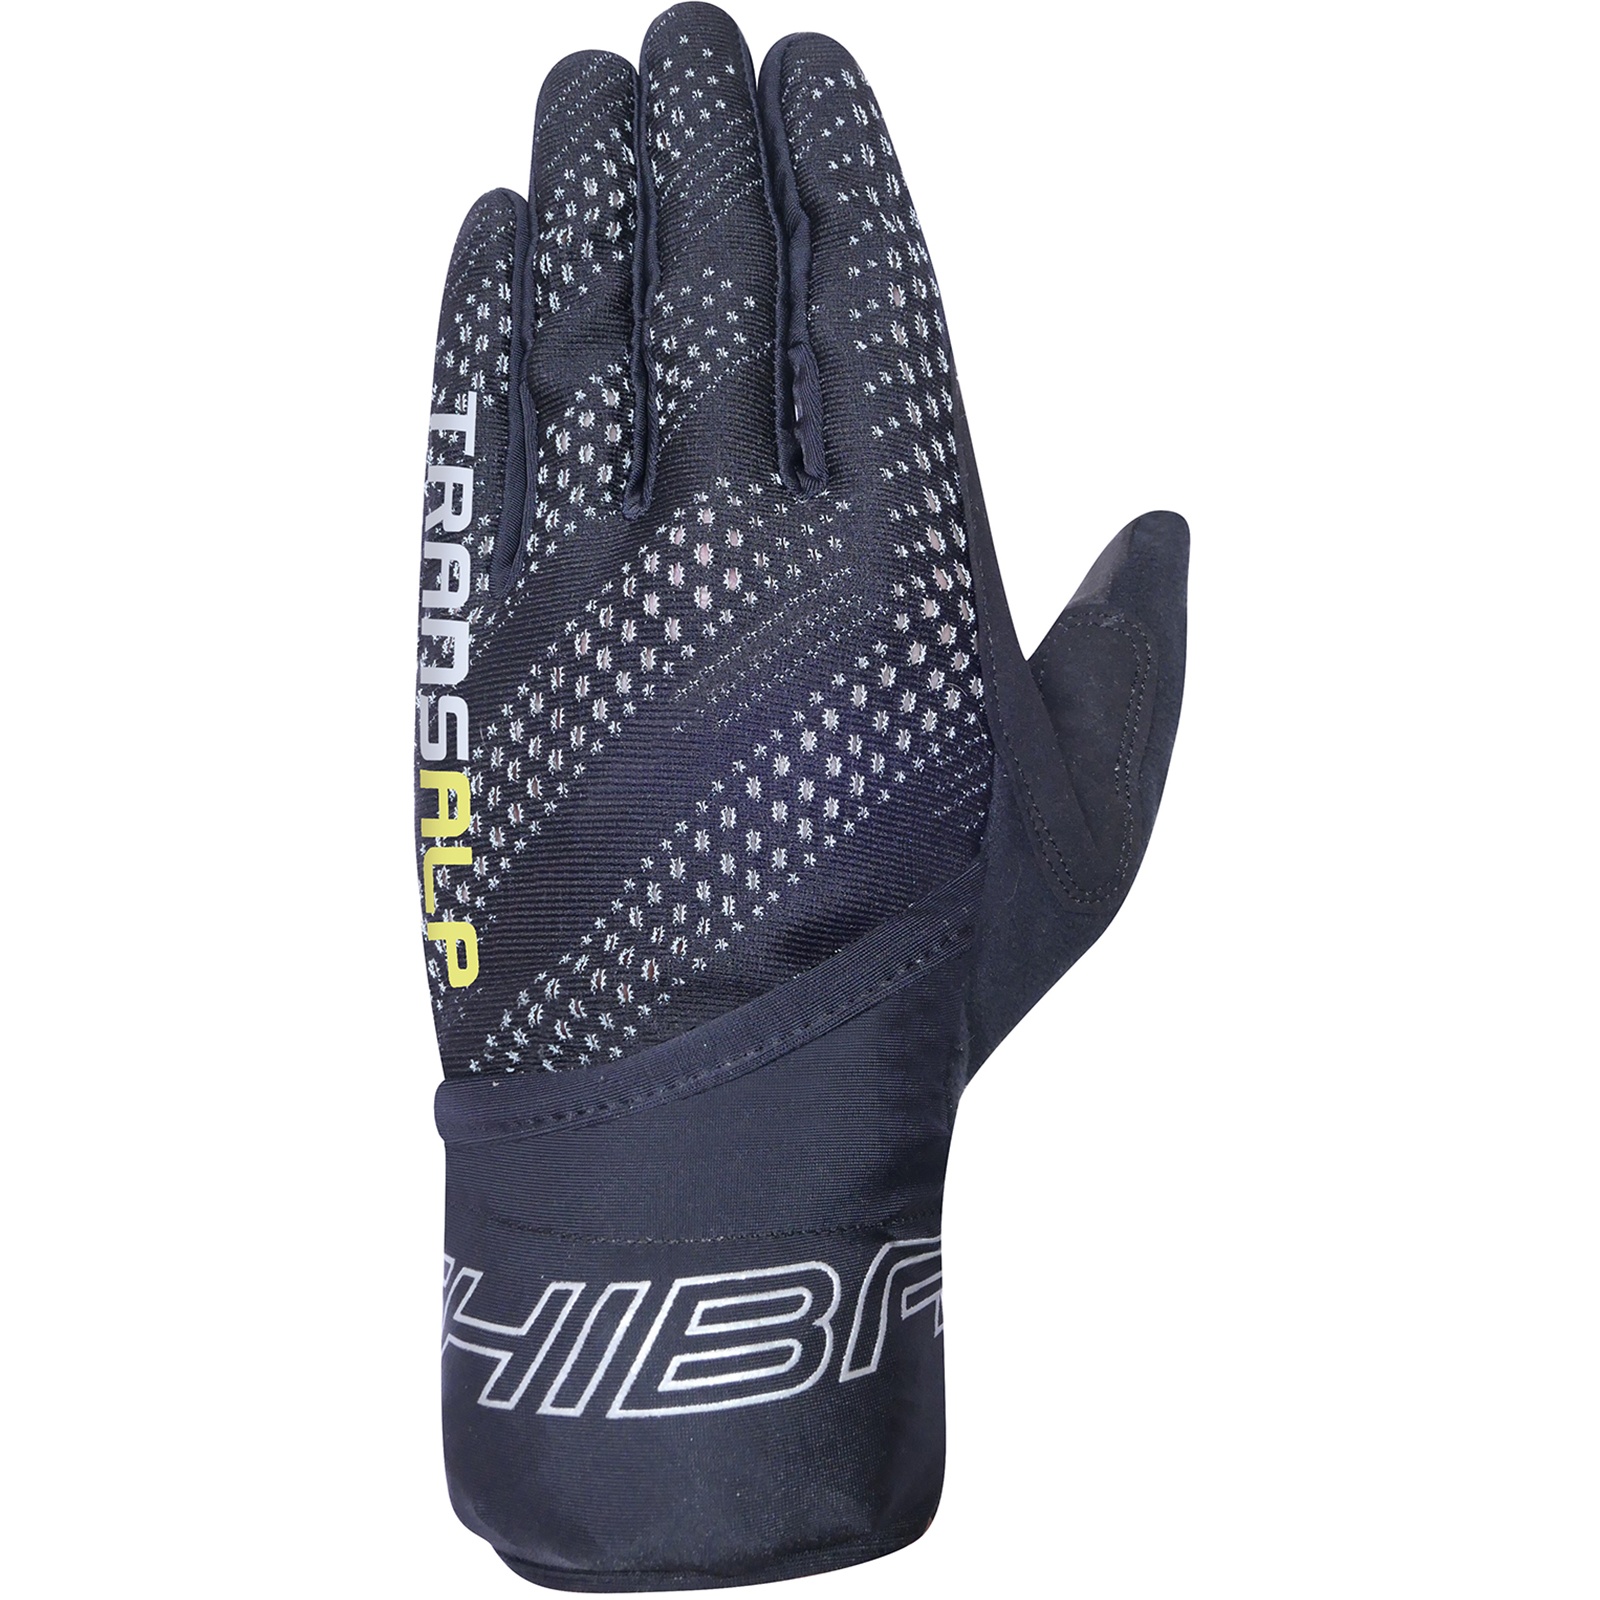 Picture of Chiba Transalp Cycling Gloves - black